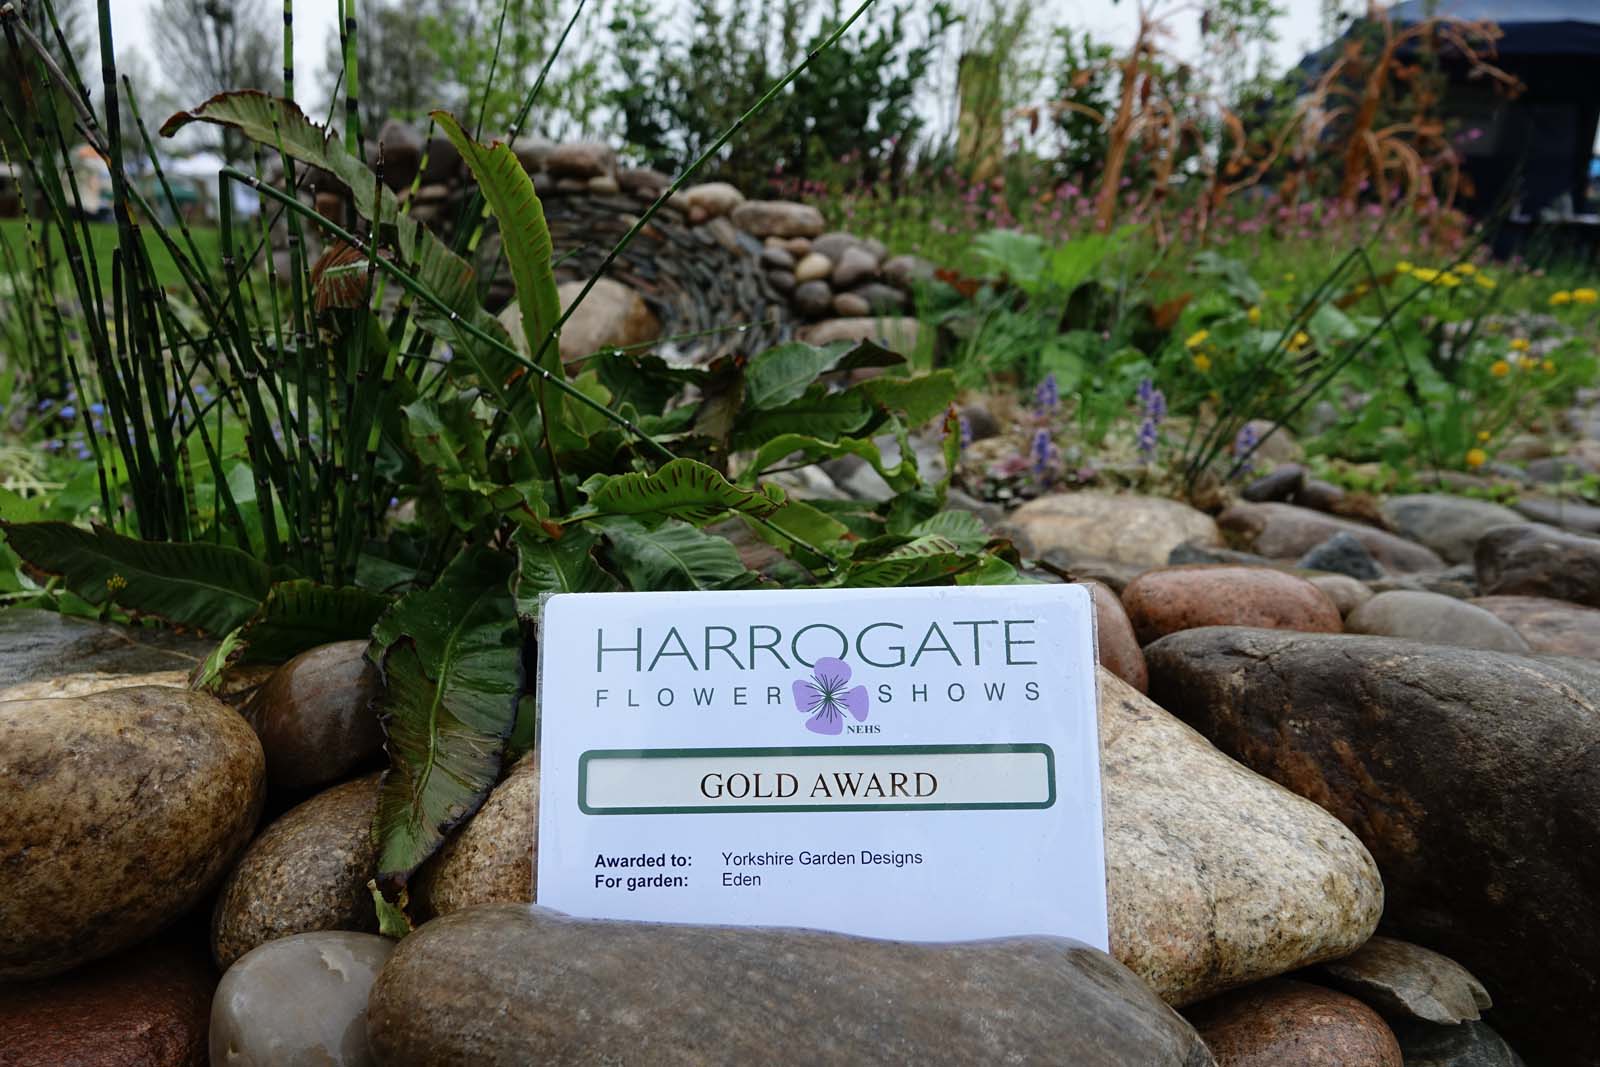 Local Garden designer, Lorna Batchelor and Stone Mason/ sculptor, Johnny Clasper have collaborated on a garden design to win a Gold Award at the Spring Flower Show in Harrogate - 27 April 2018.